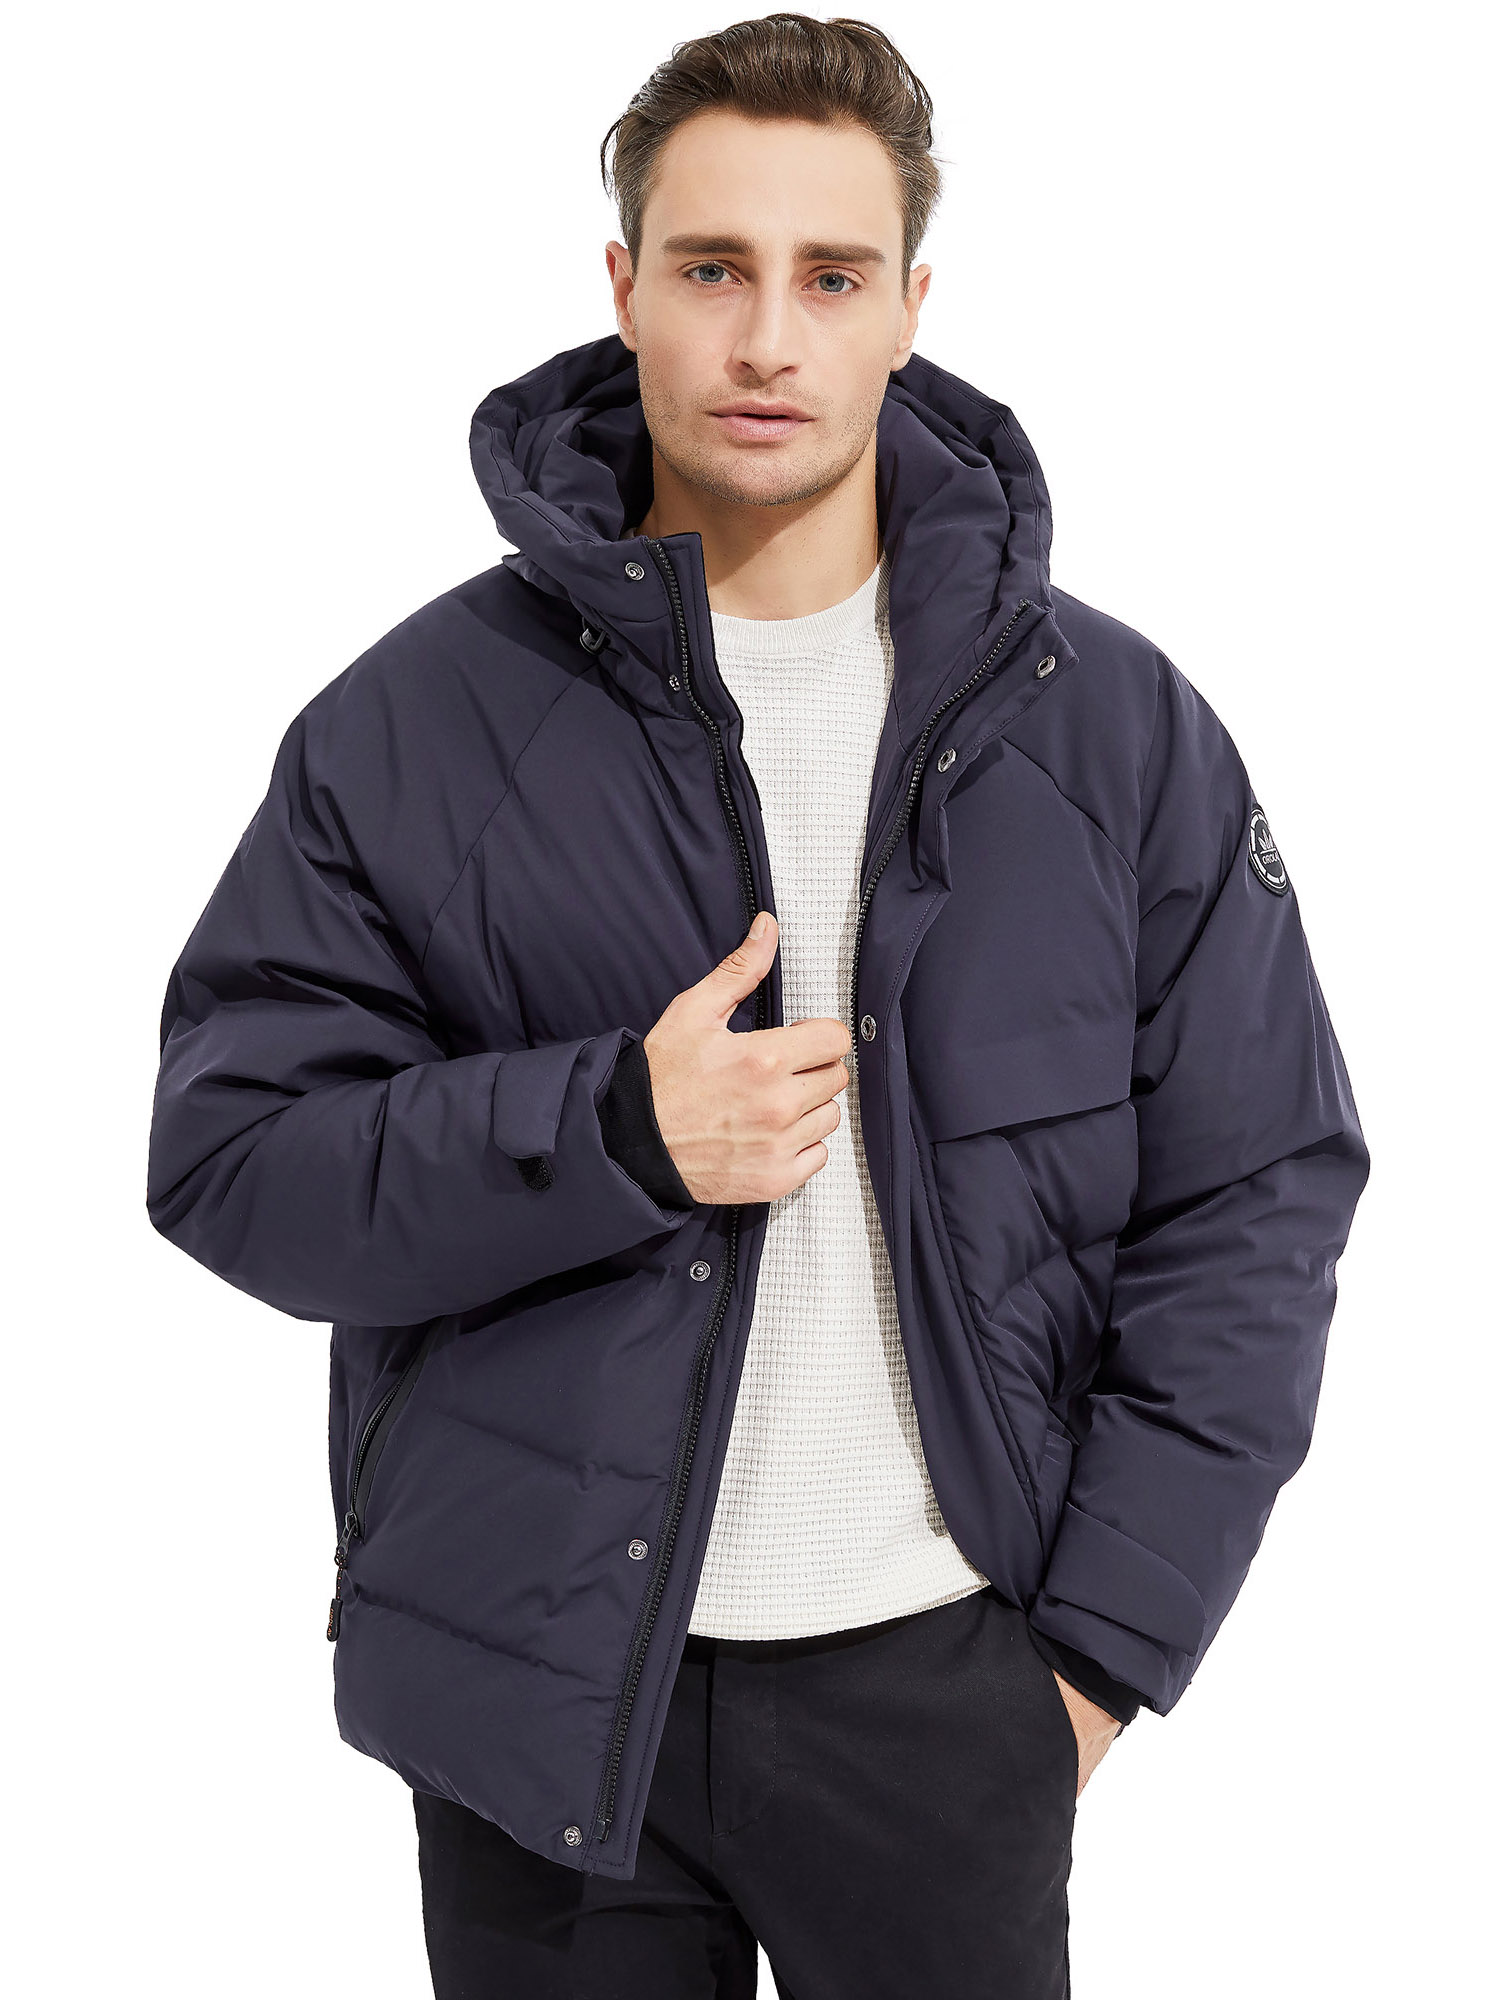 Orolay Men's Winter Down Jacket with Adjustable Drawstring Hood Ribbed Cuff - image 1 of 5